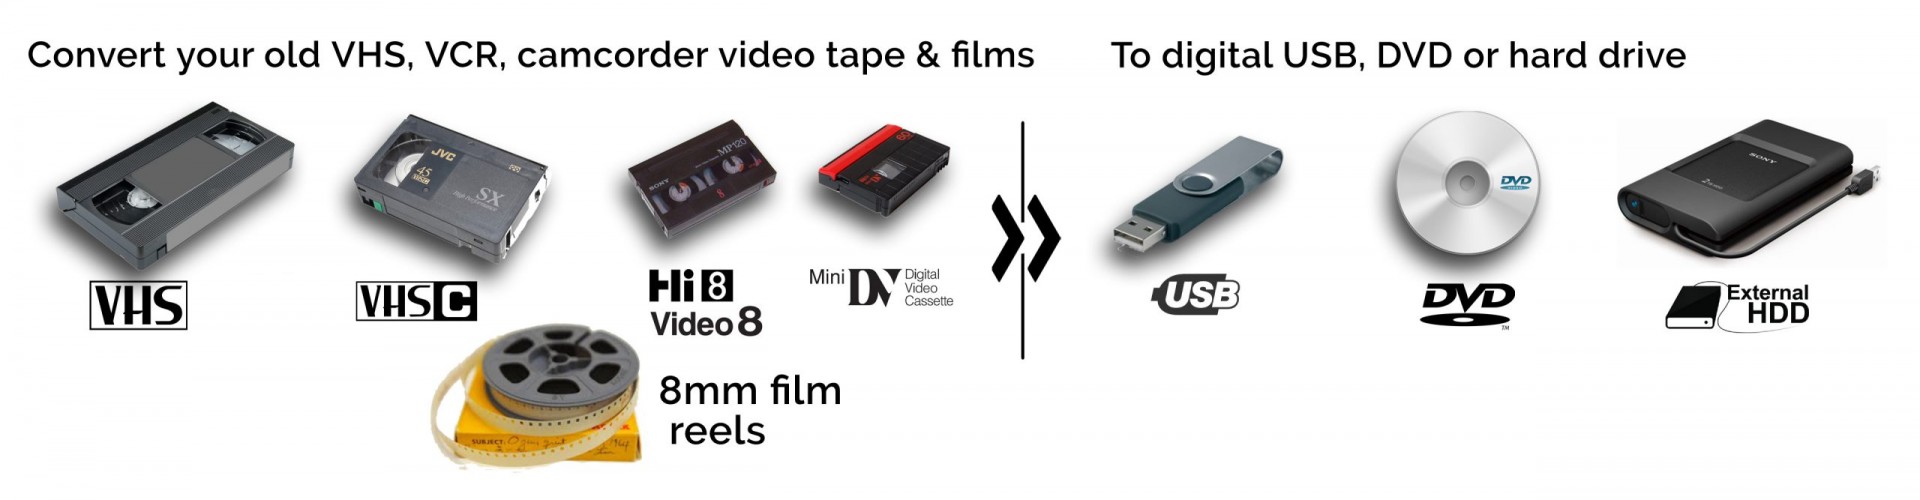 Convert Your Old Vhs Vcr Camcorder Video Tapes To Digital Video Essentials